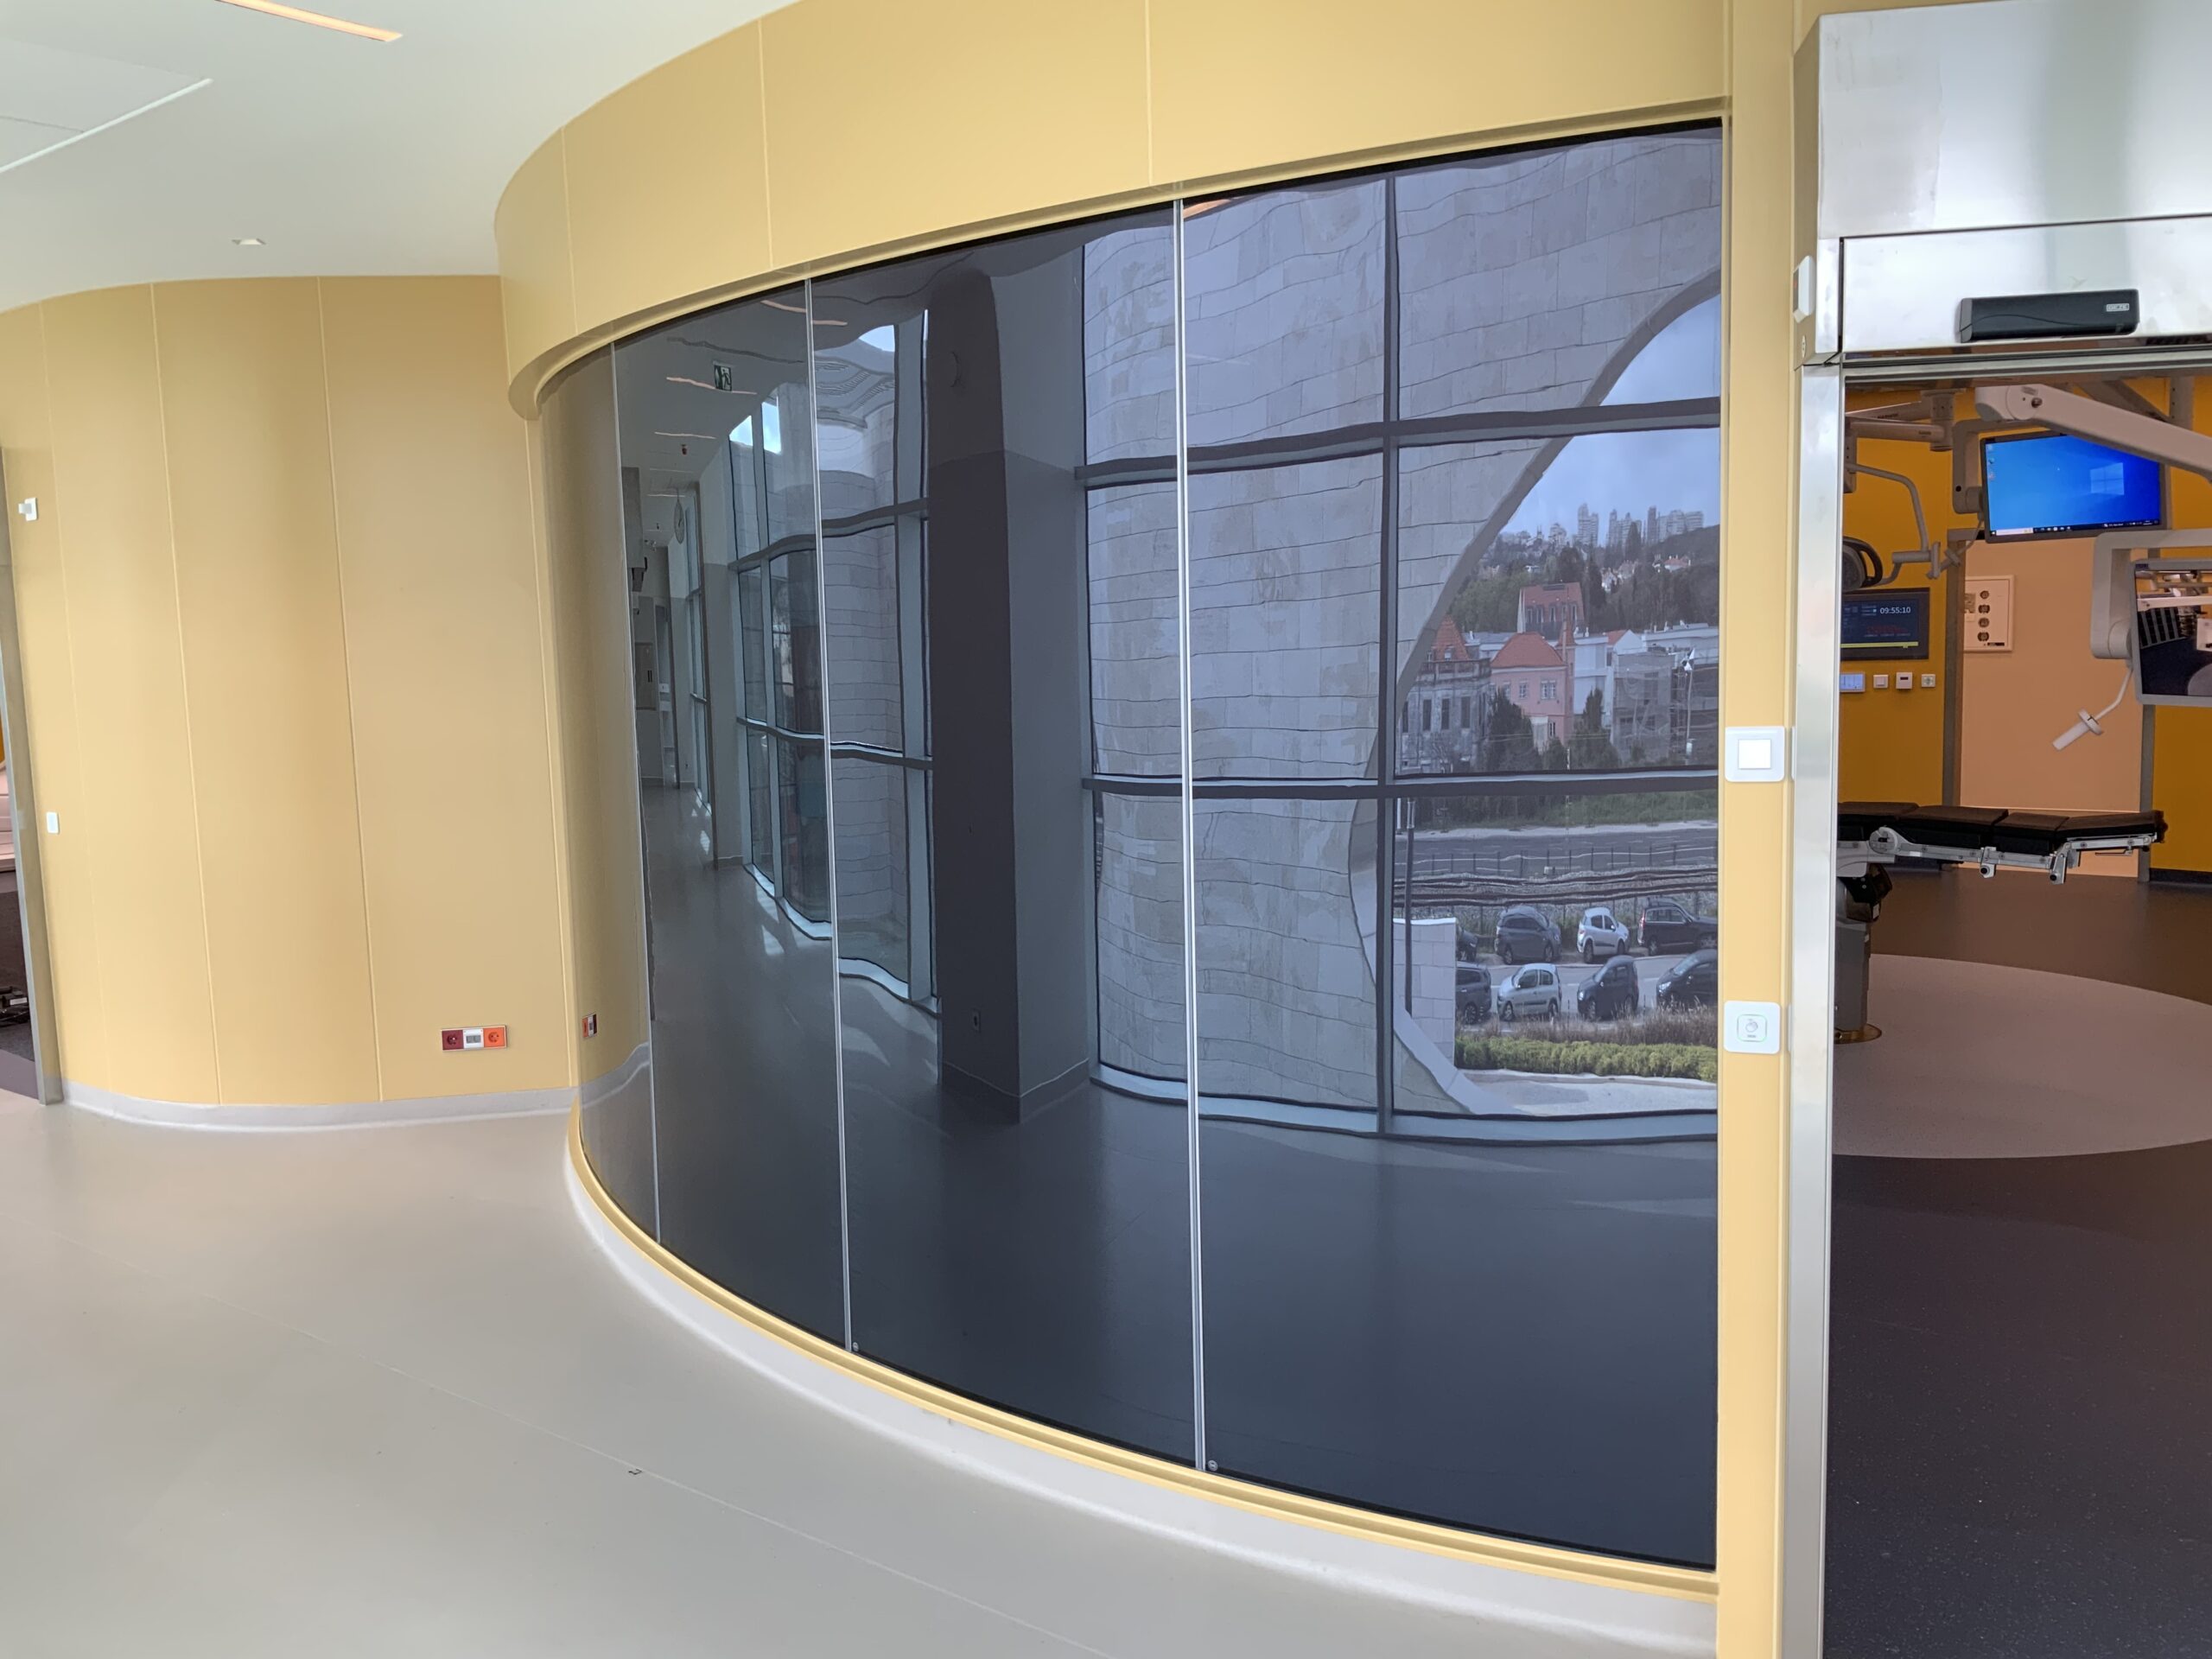 Hygienic Blackout Smart Glass delivers multi-state privacy in a challenging healthcare setting.